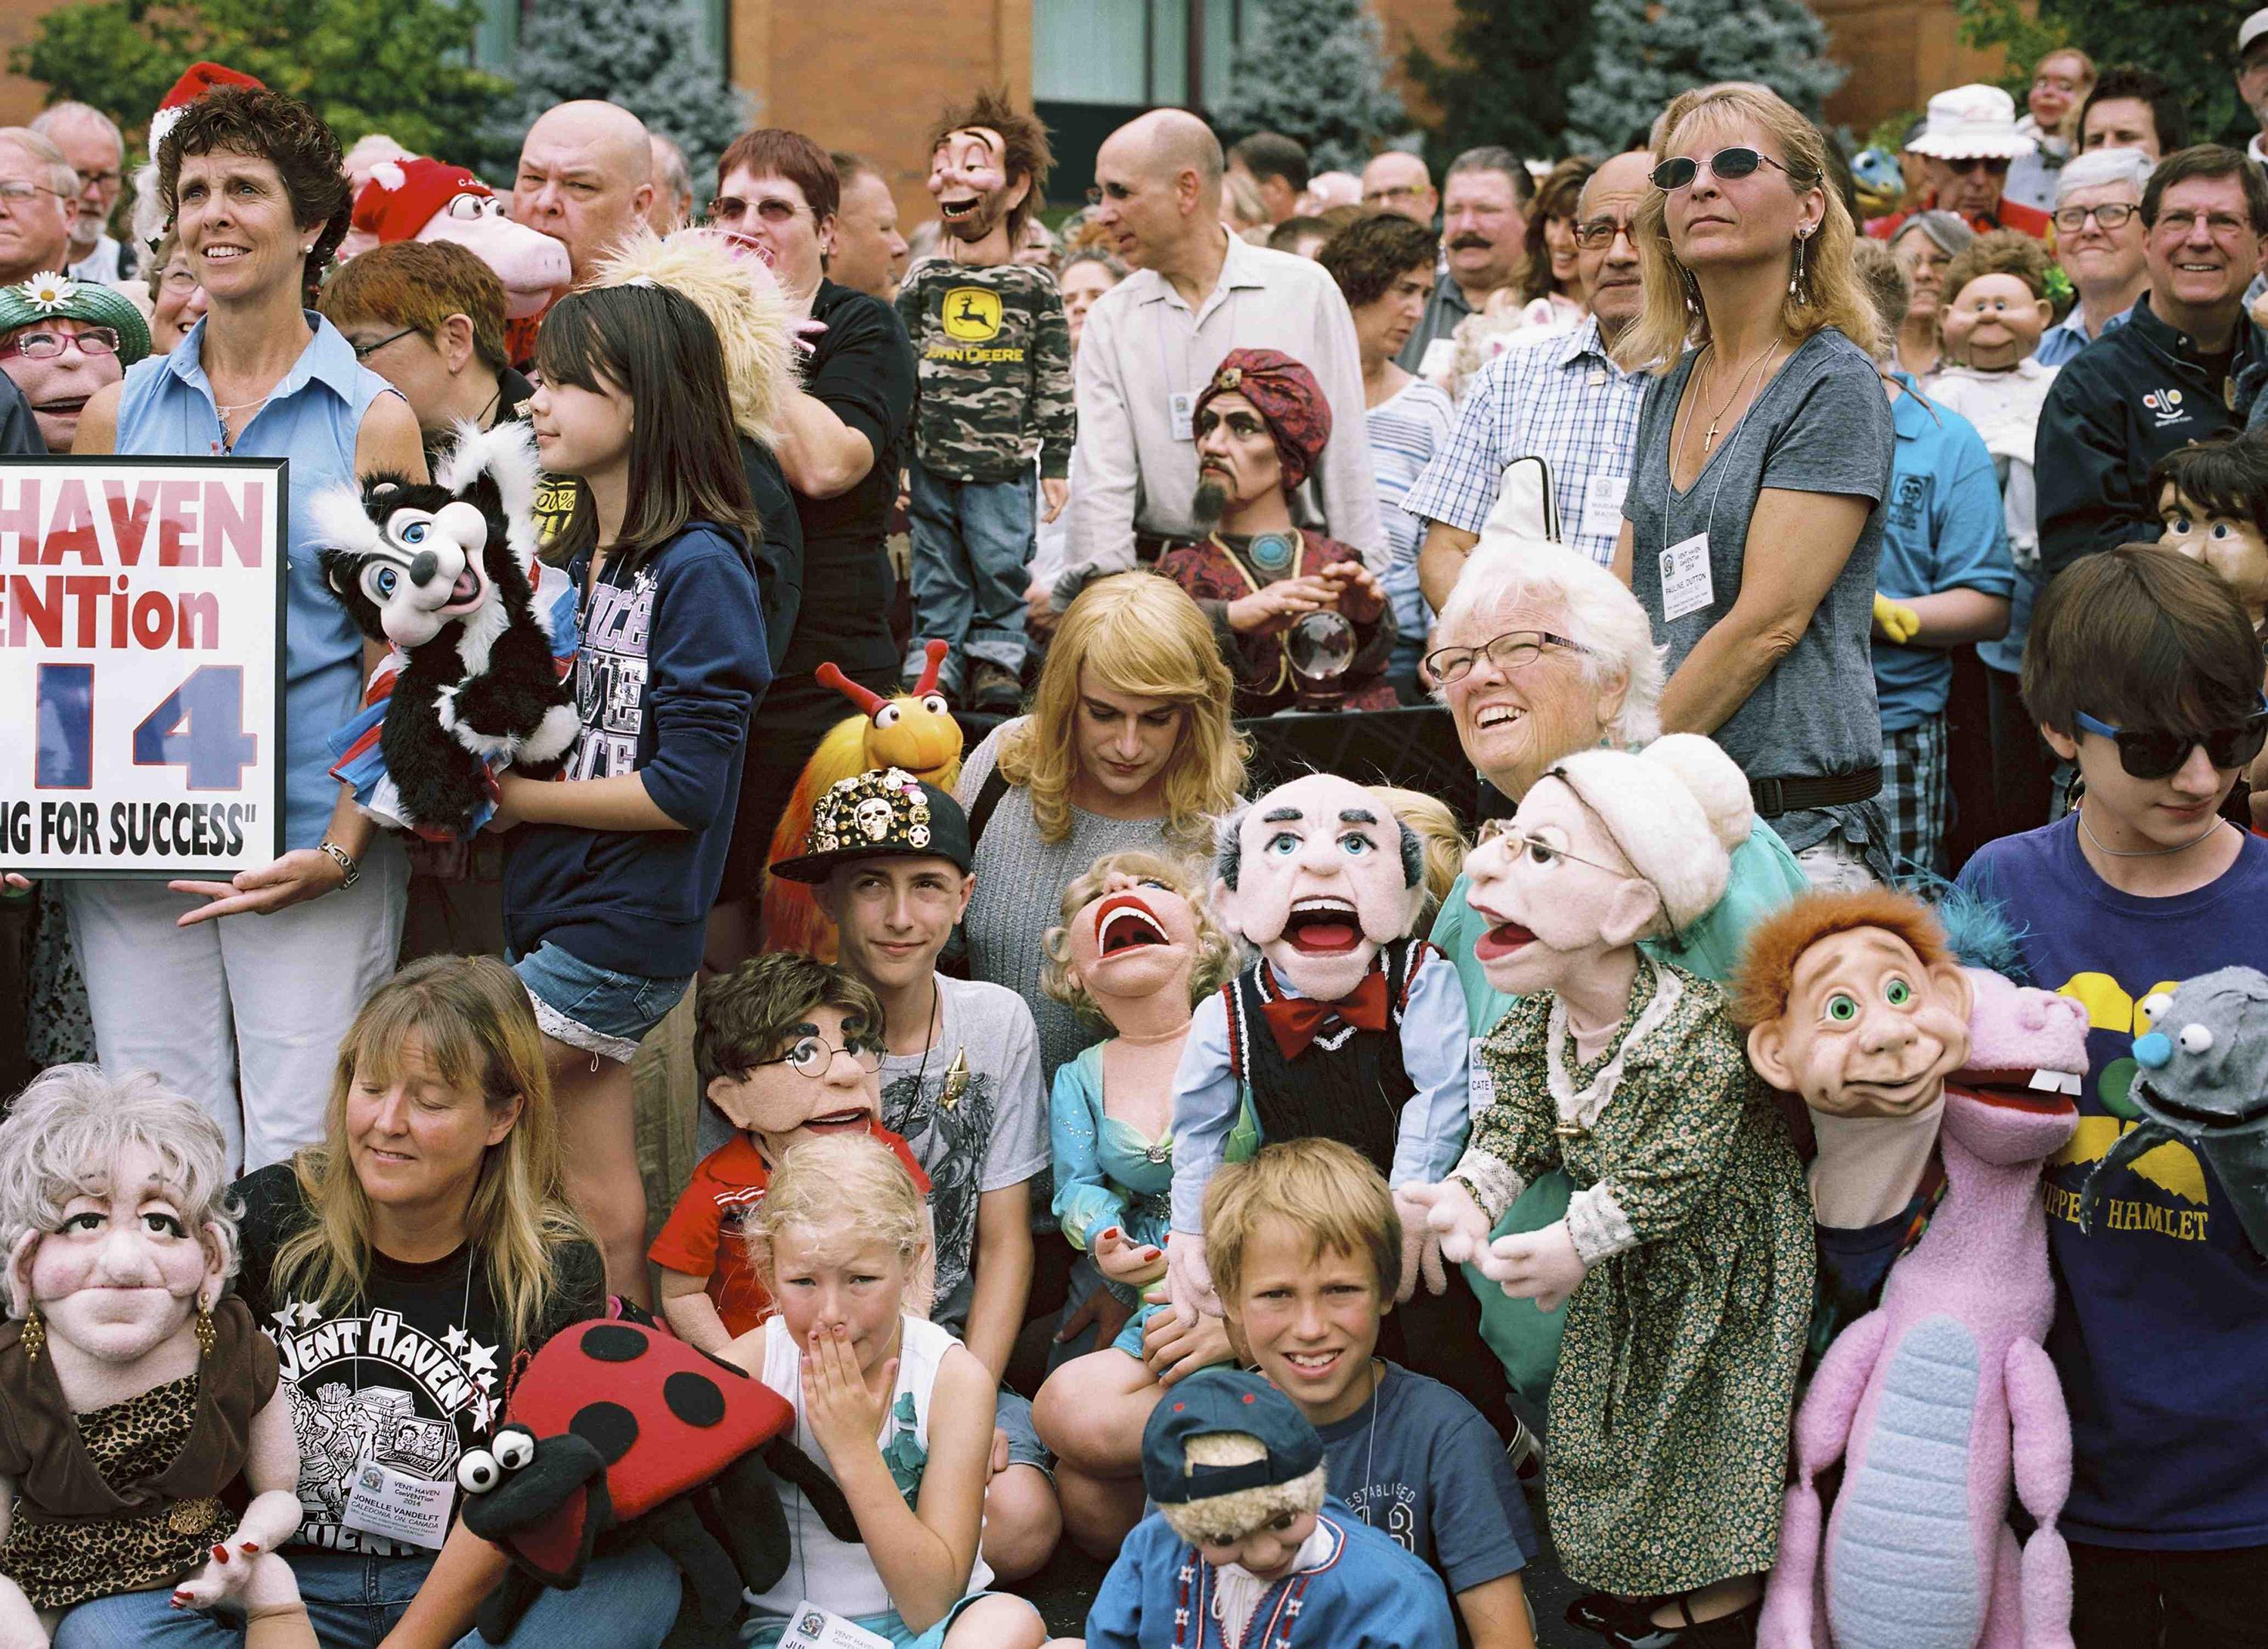 Group photograph of seated and standing people and kids holding various ventriloquist dummies